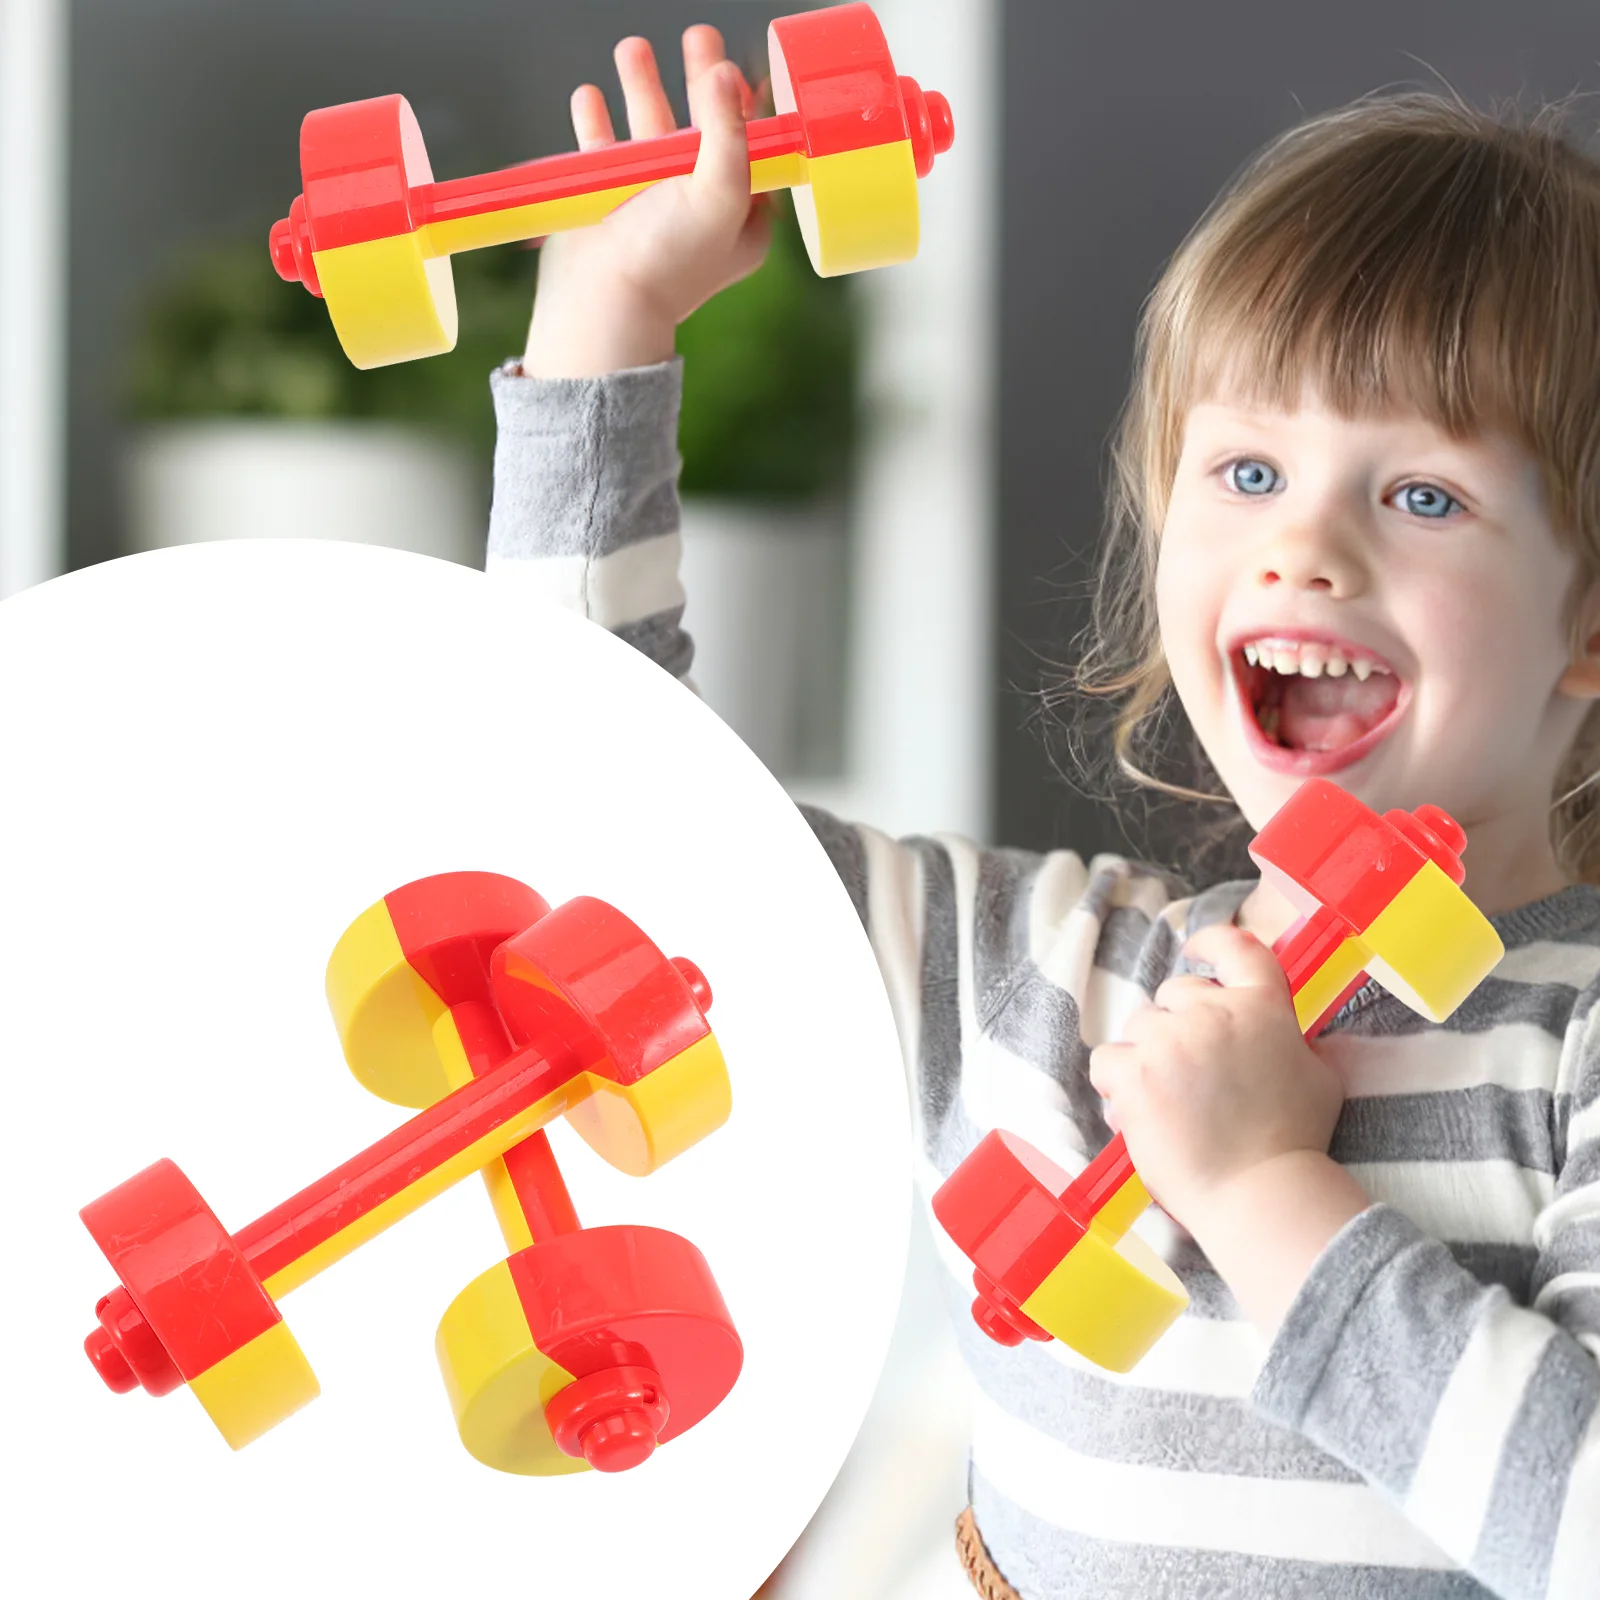 

2 Pcs Plastic Outdoor Playsets Children's Dumbbell Home Kids Sports Interactive Weights Abs Supply Toy Exercising